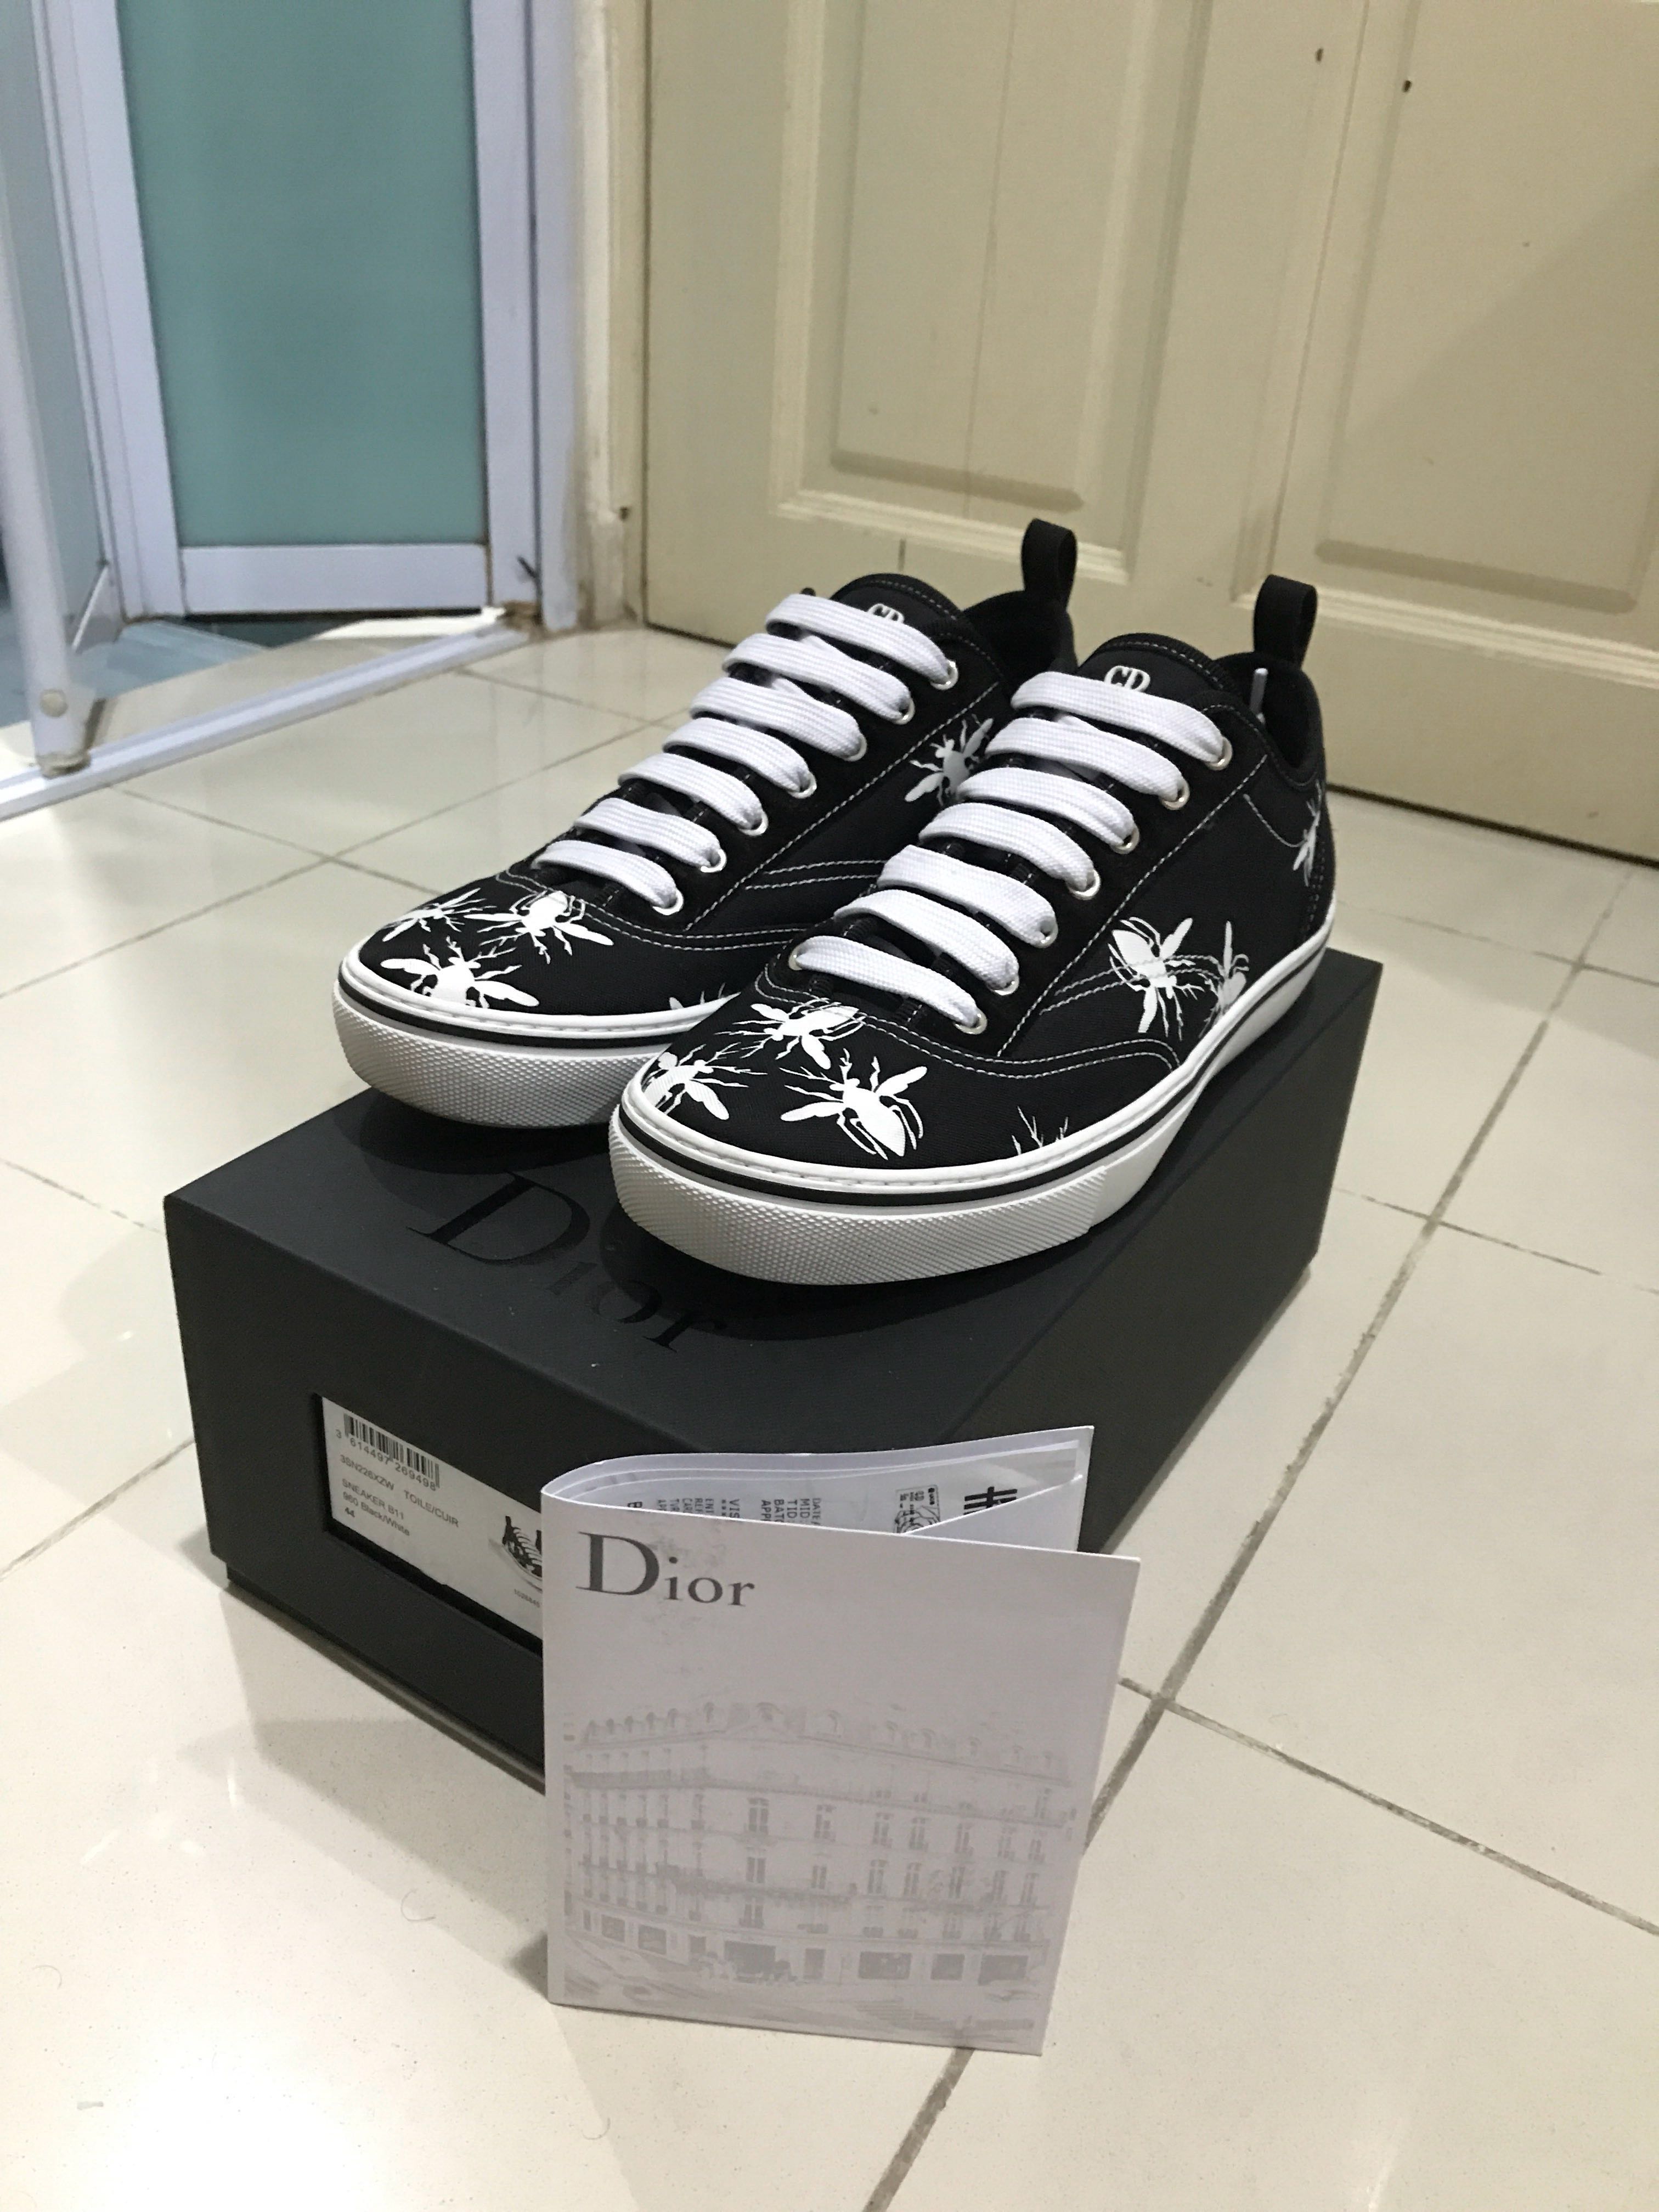 Dior Shoes Used Finland, SAVE 57% - aveclumiere.com